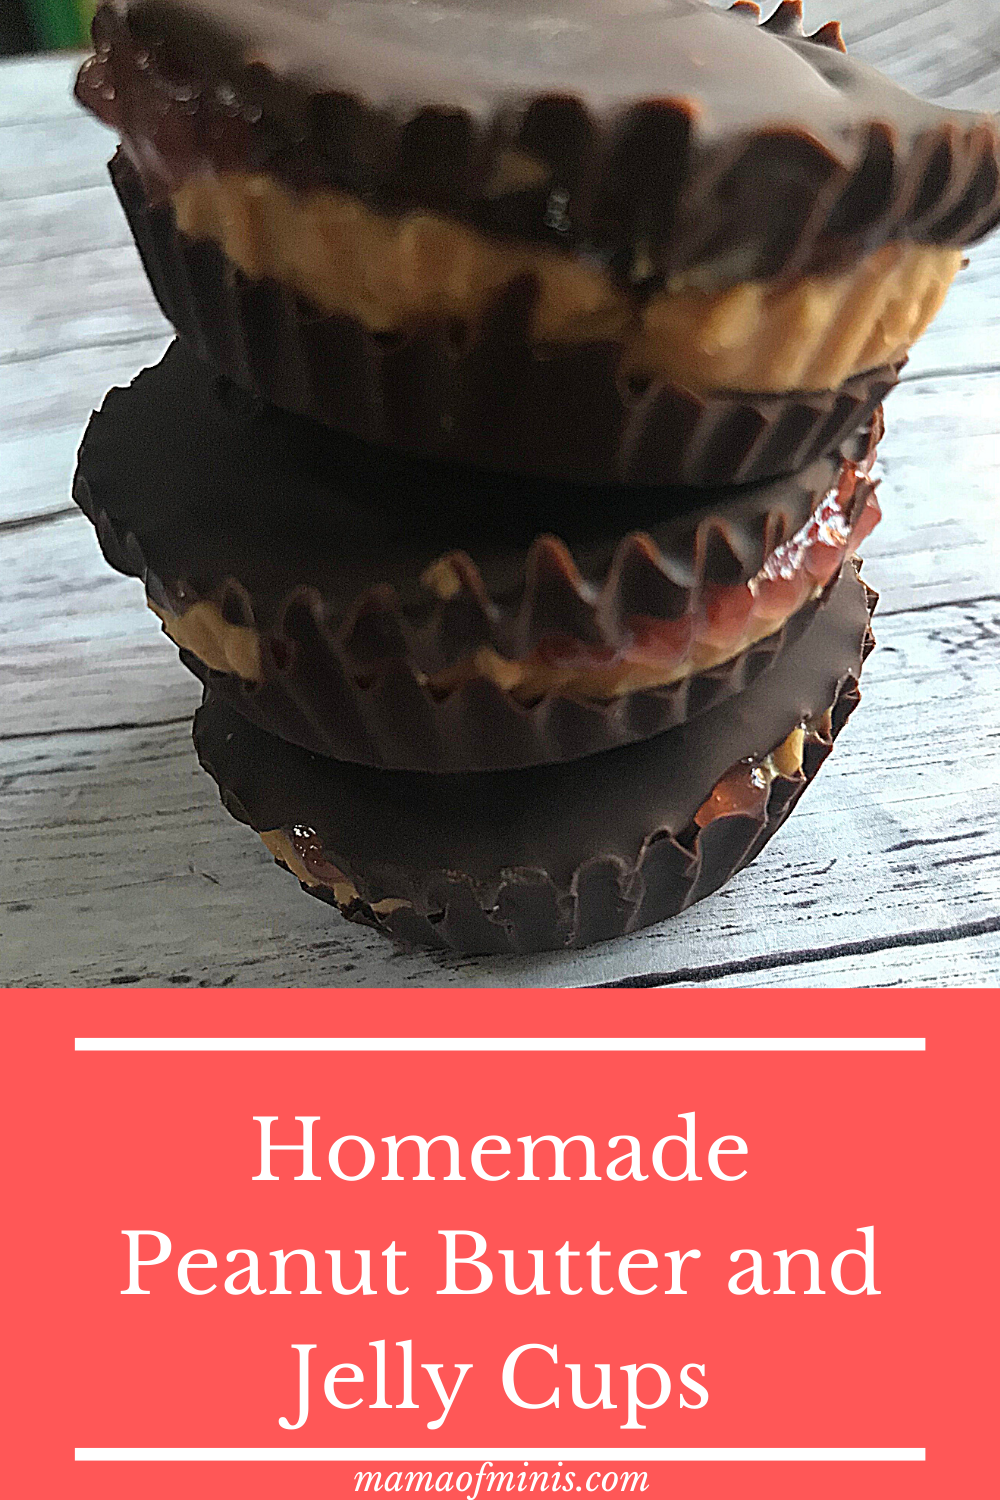 Homemade Peanut Butter and Jelly Cups